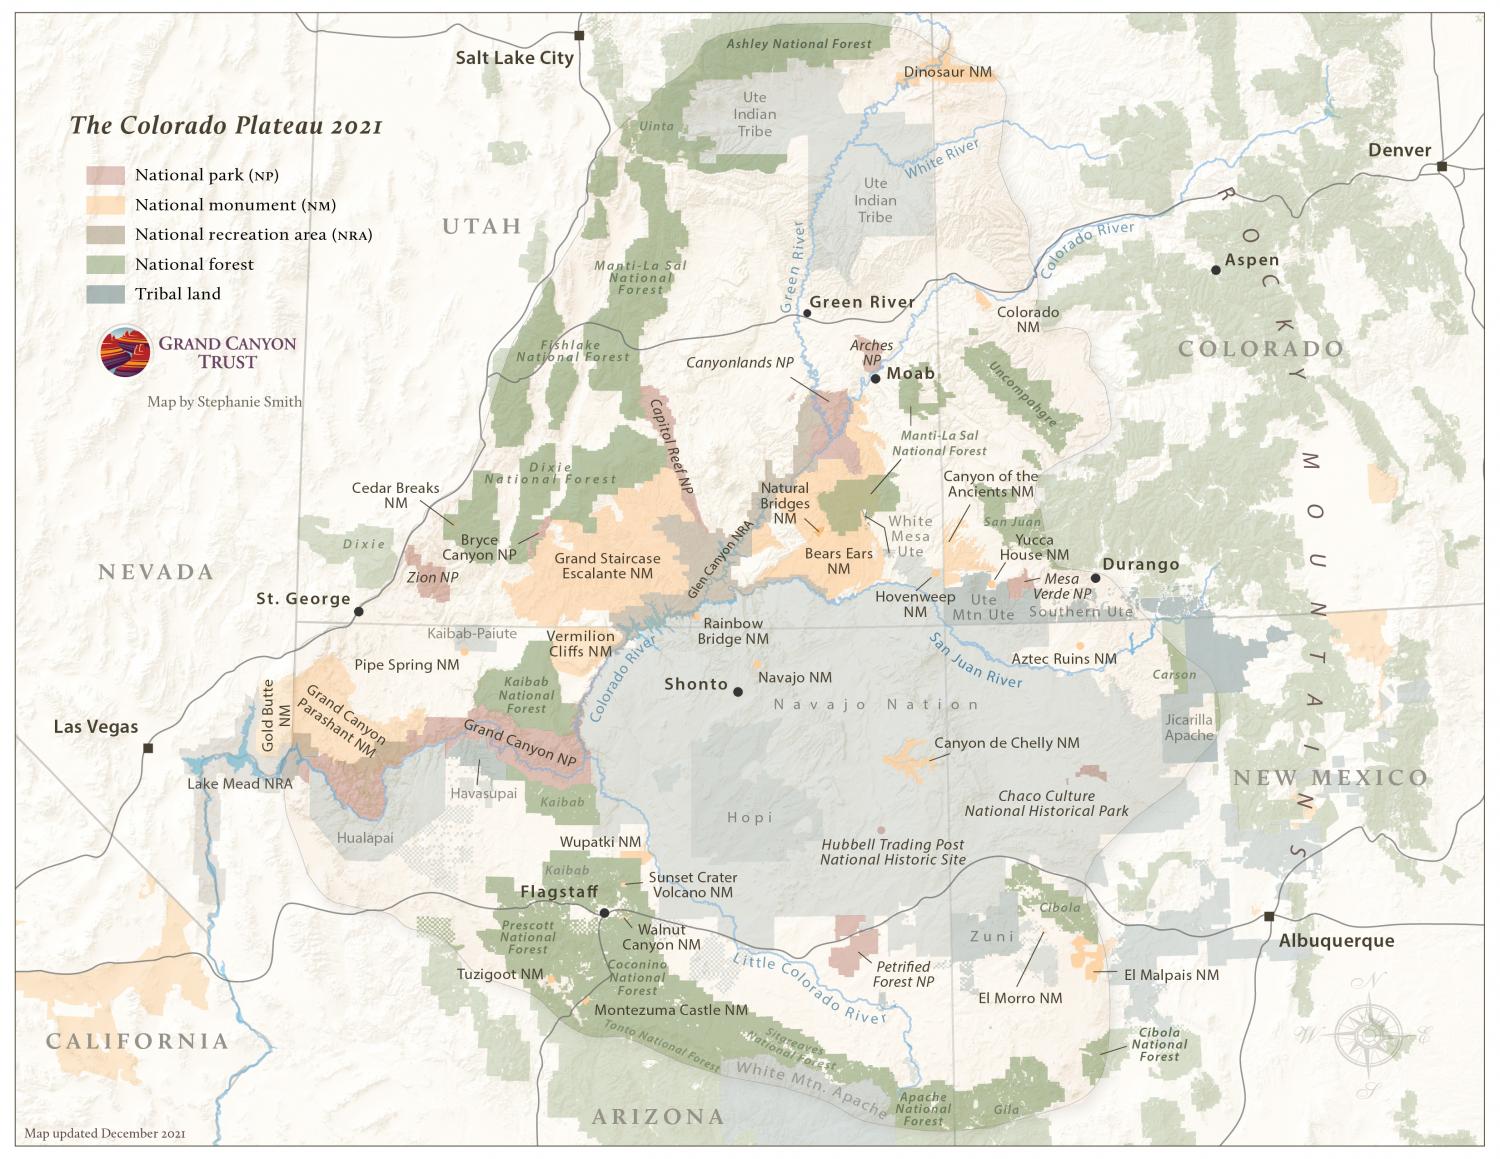 View a map of the Colorado Plateau.